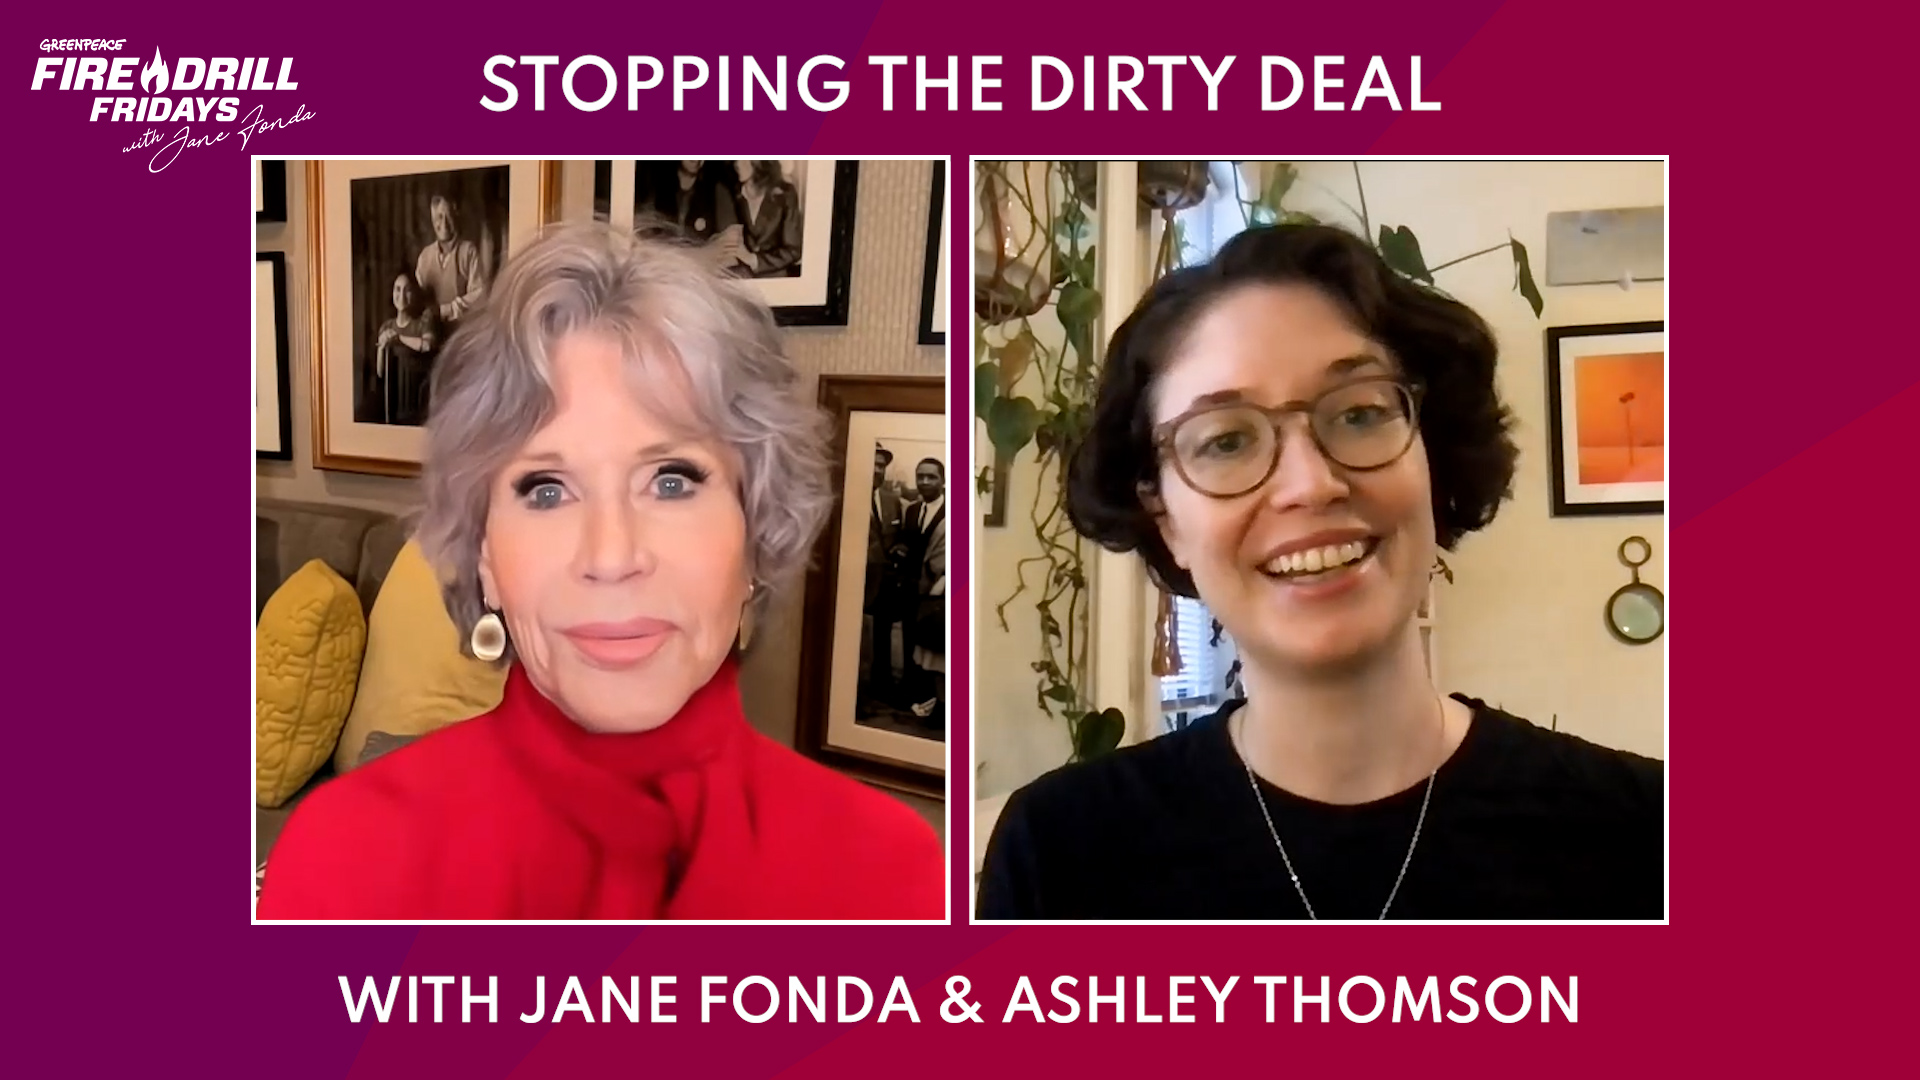 Watch Jane Fonda & Ashley Thomson Discuss the Dirty Deal and How to Stop it From Becoming a Reality